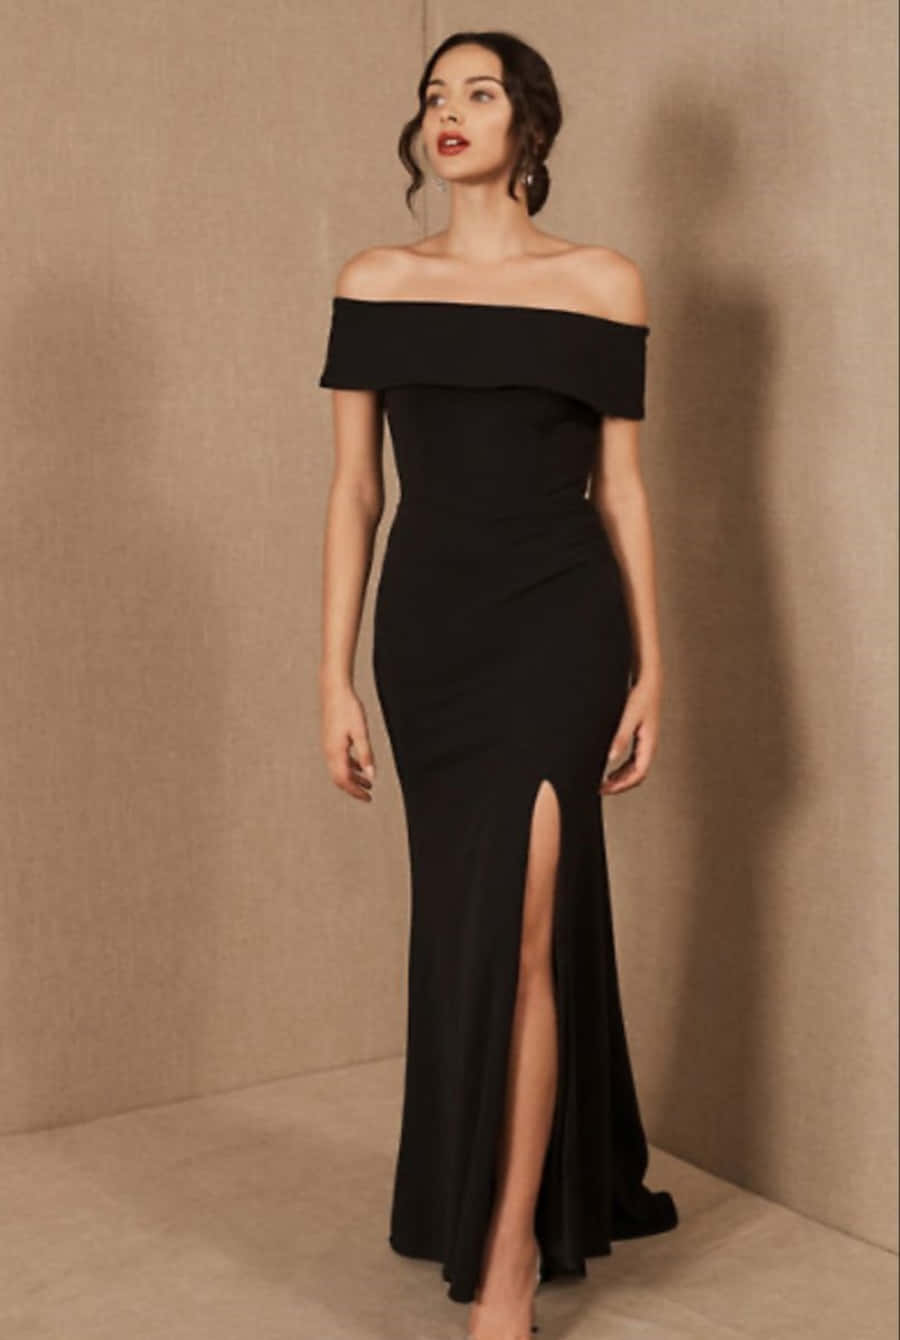 Look amazing in this chic and timeless black tie dress! Wallpaper